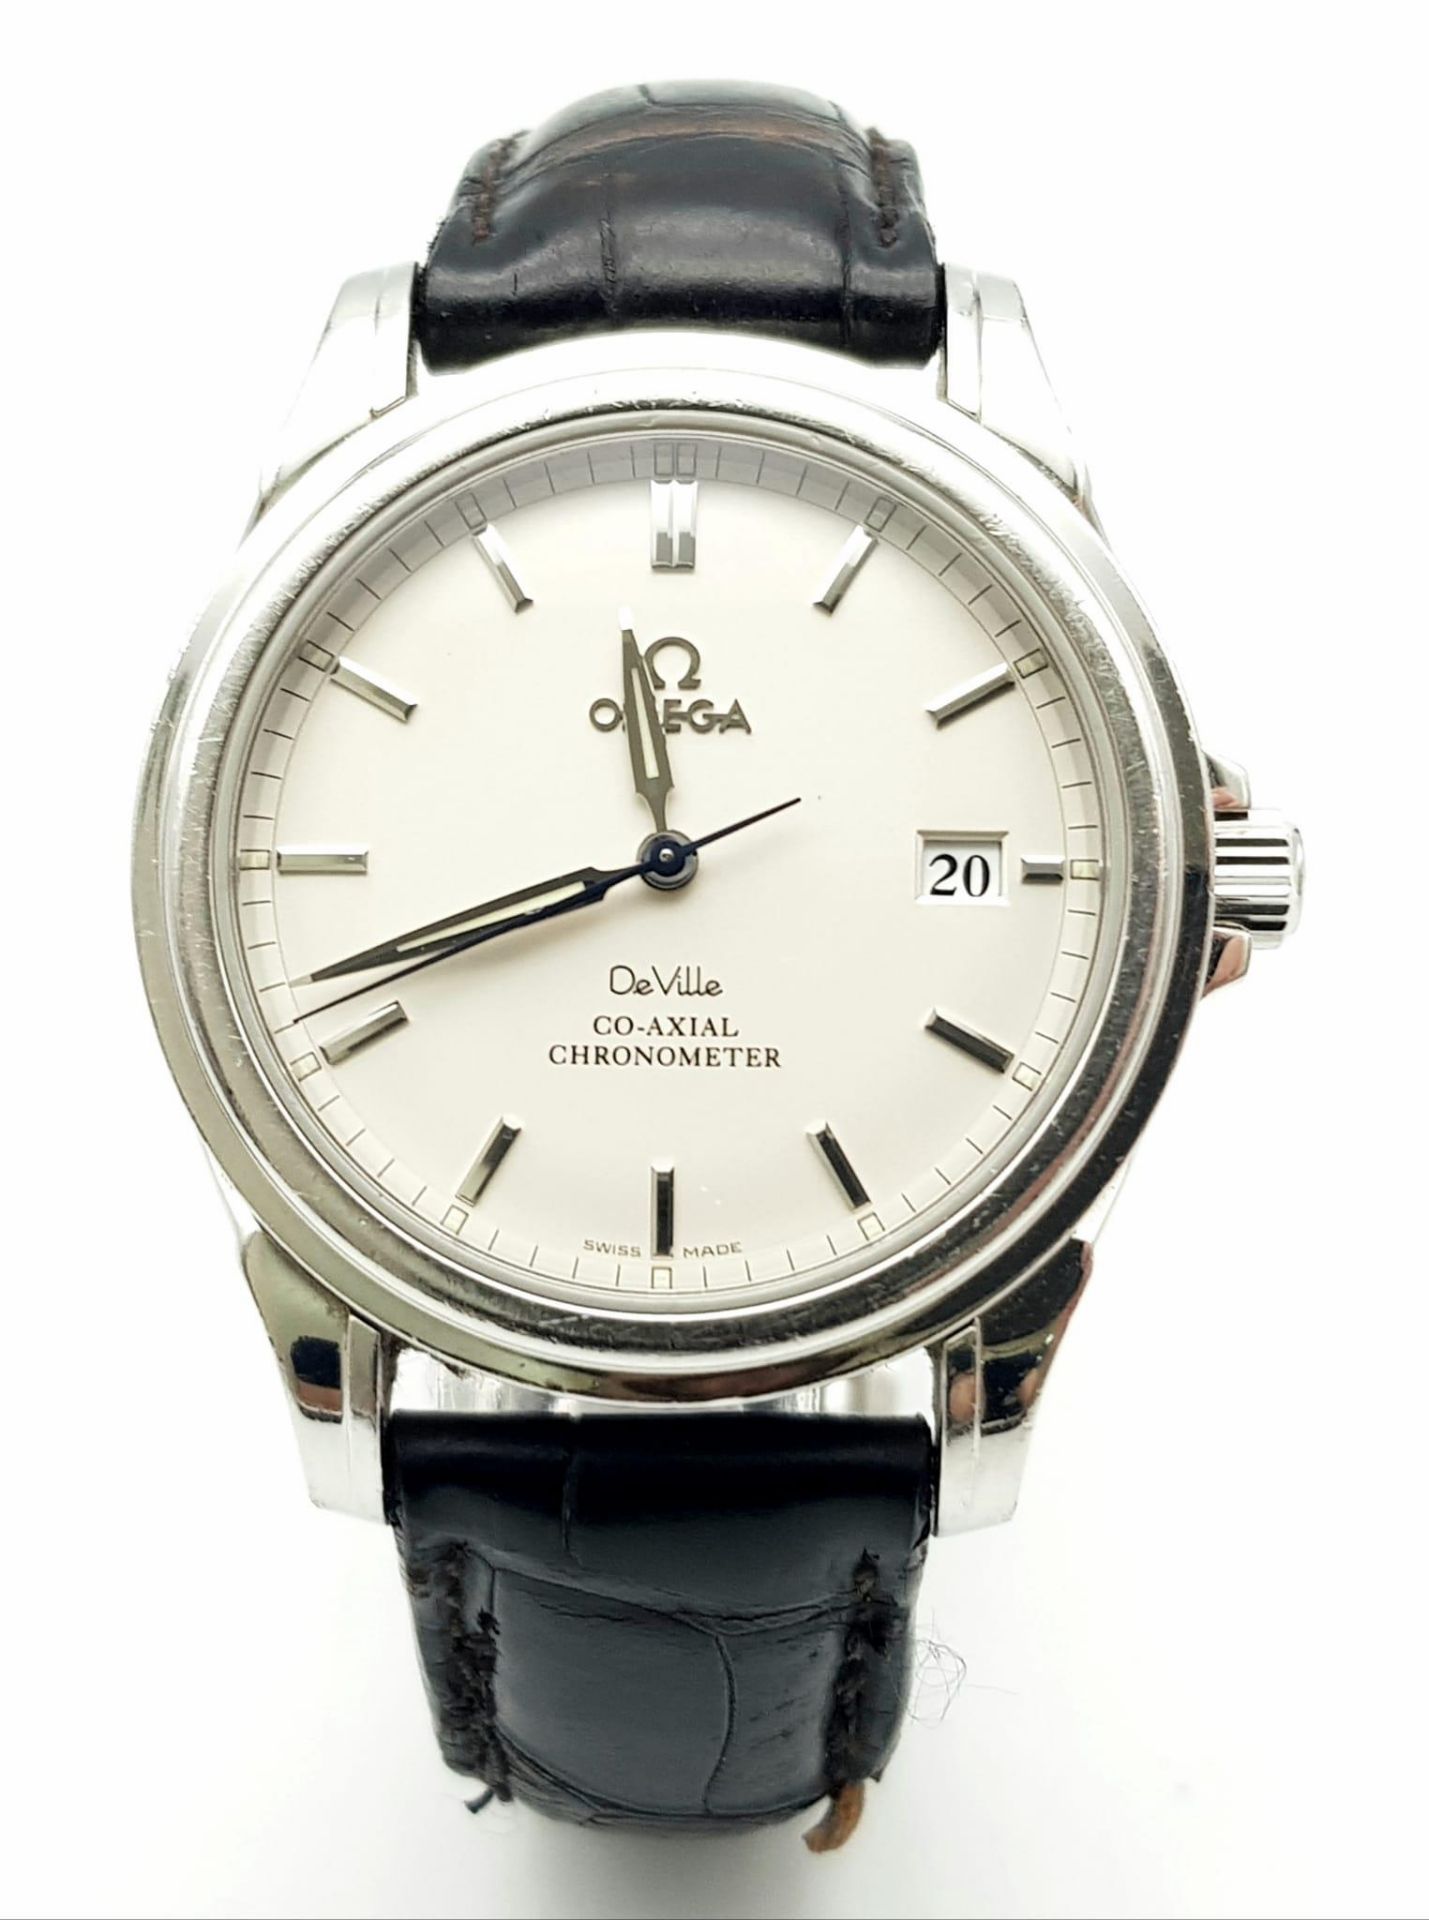 OMEGA DE VILLE CO AXIAL CHRONOMETER STAINLESS STEEL WATCH, WHITE FACE AND DIALS WITH BLACK LEATHER